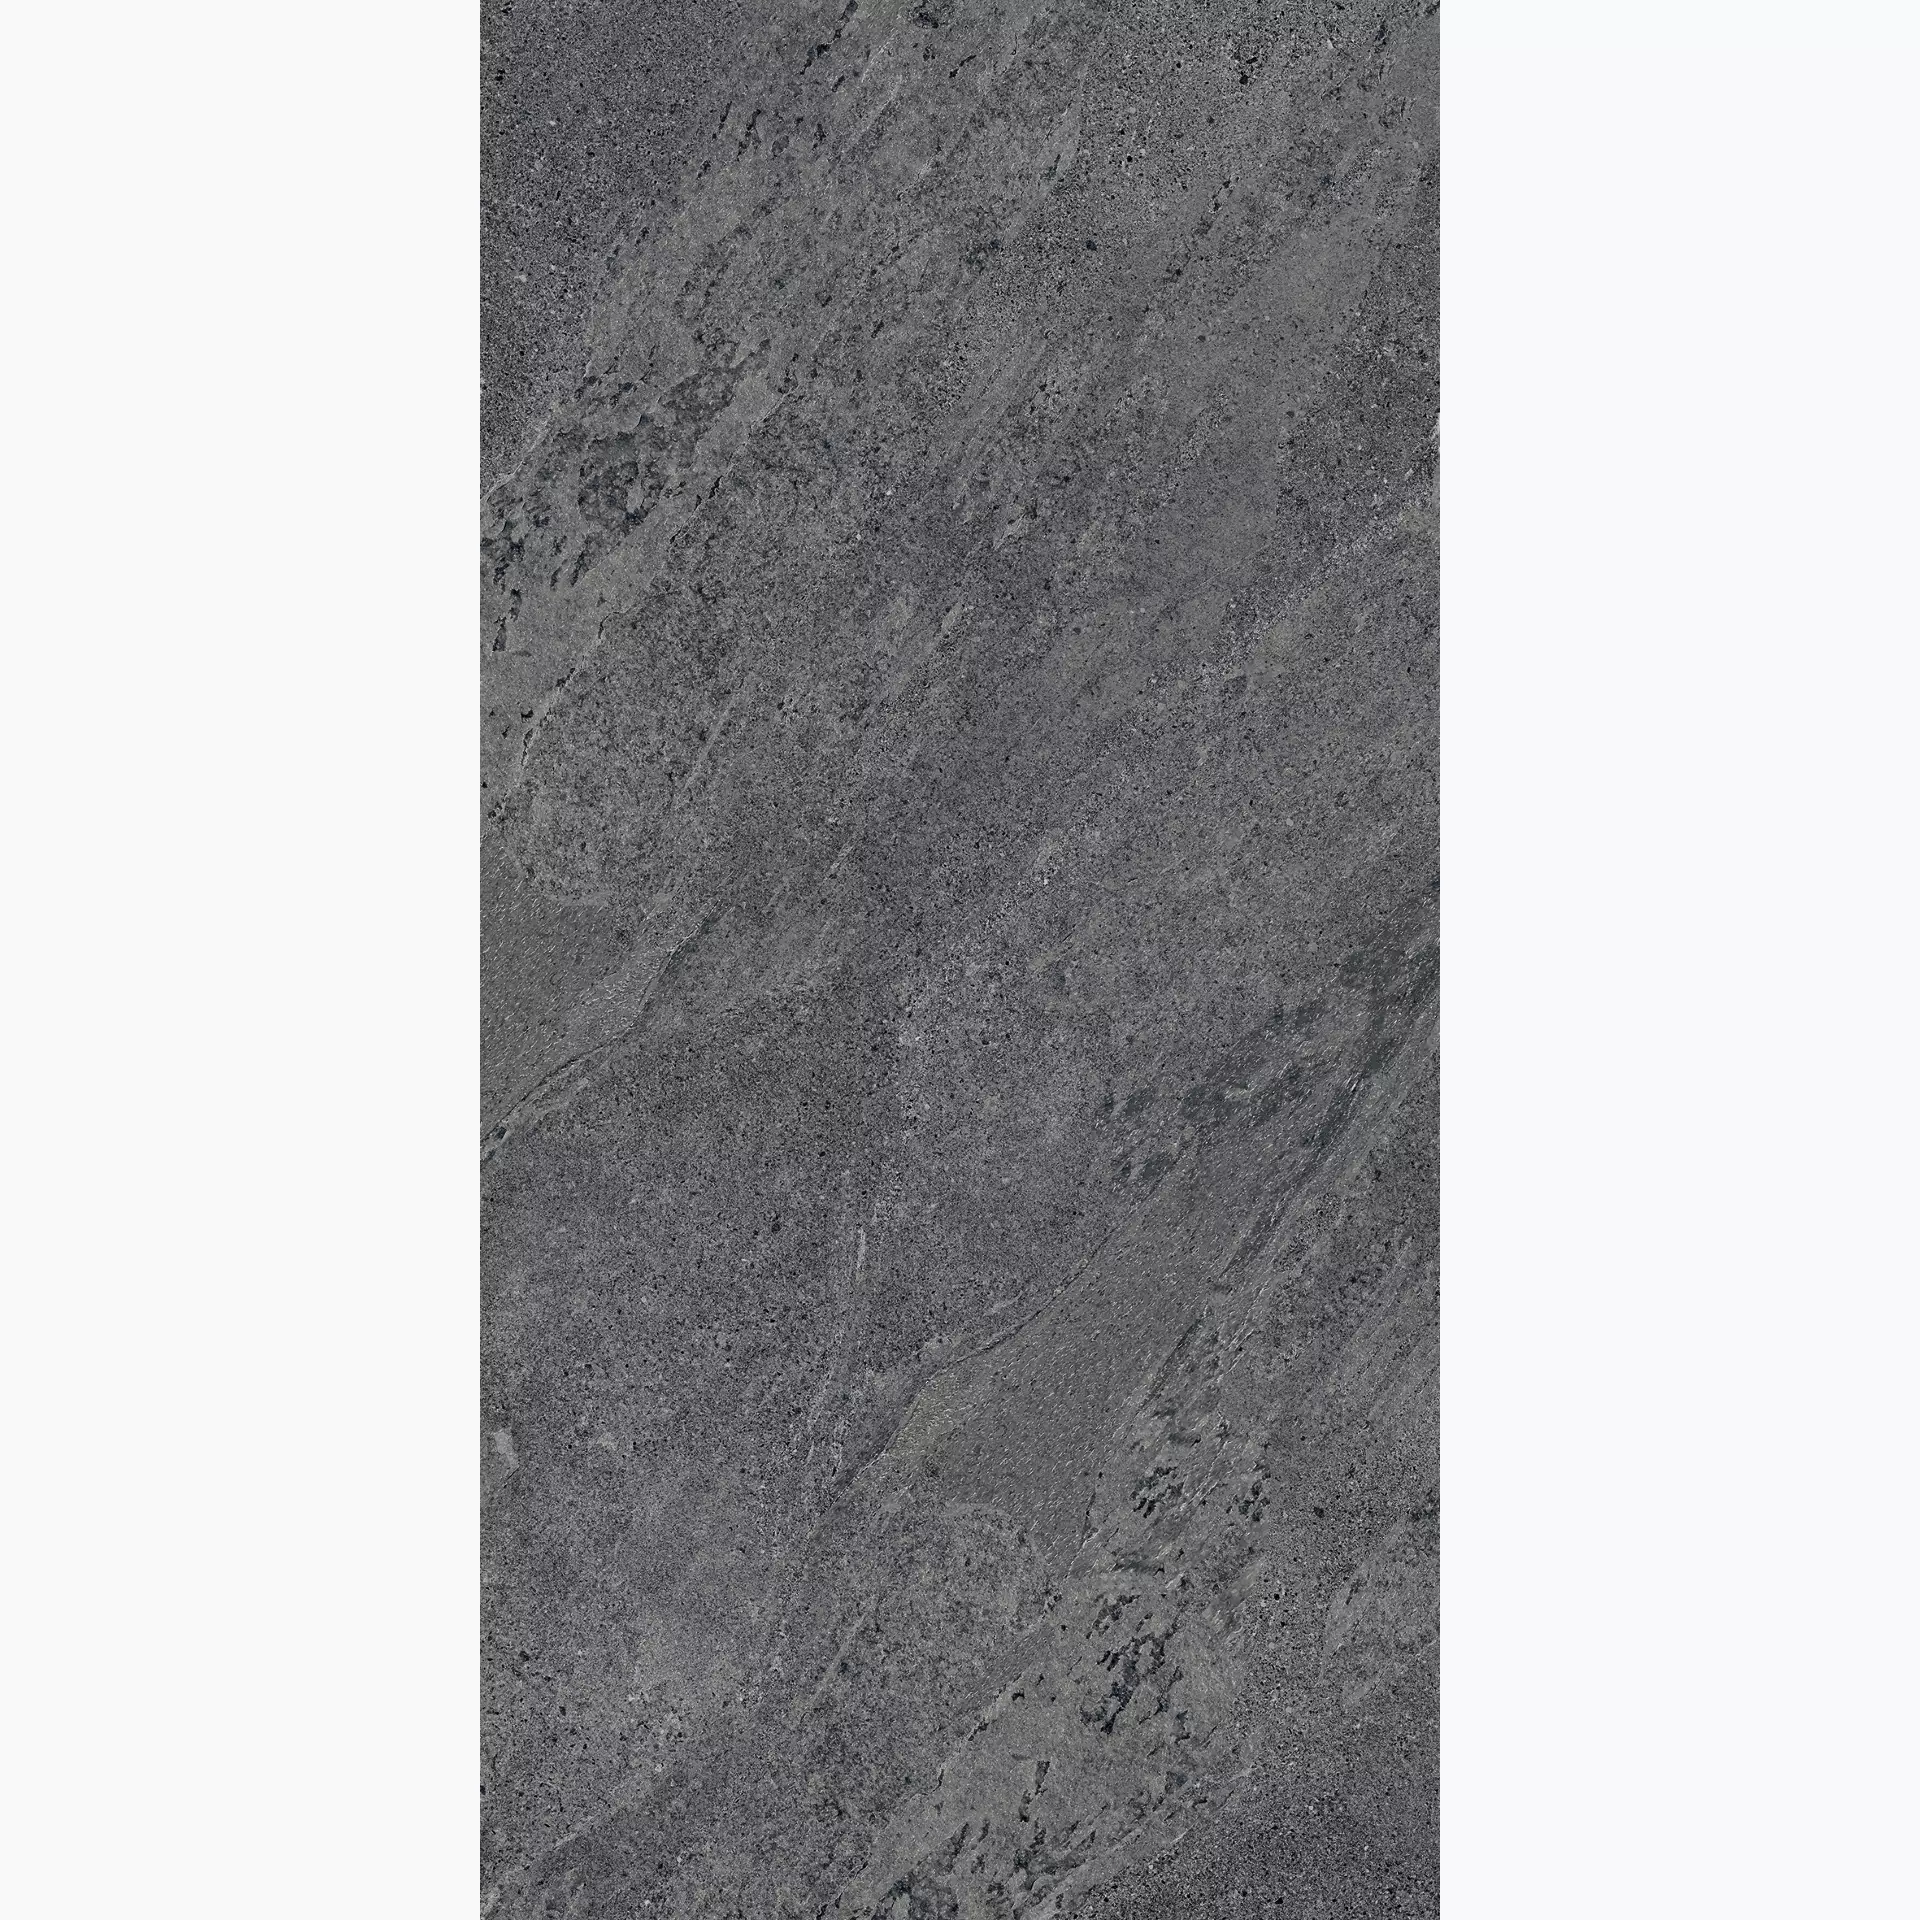 Keope Ubik Anthracite Strutturato 46473149 30x60cm rectified 9mm